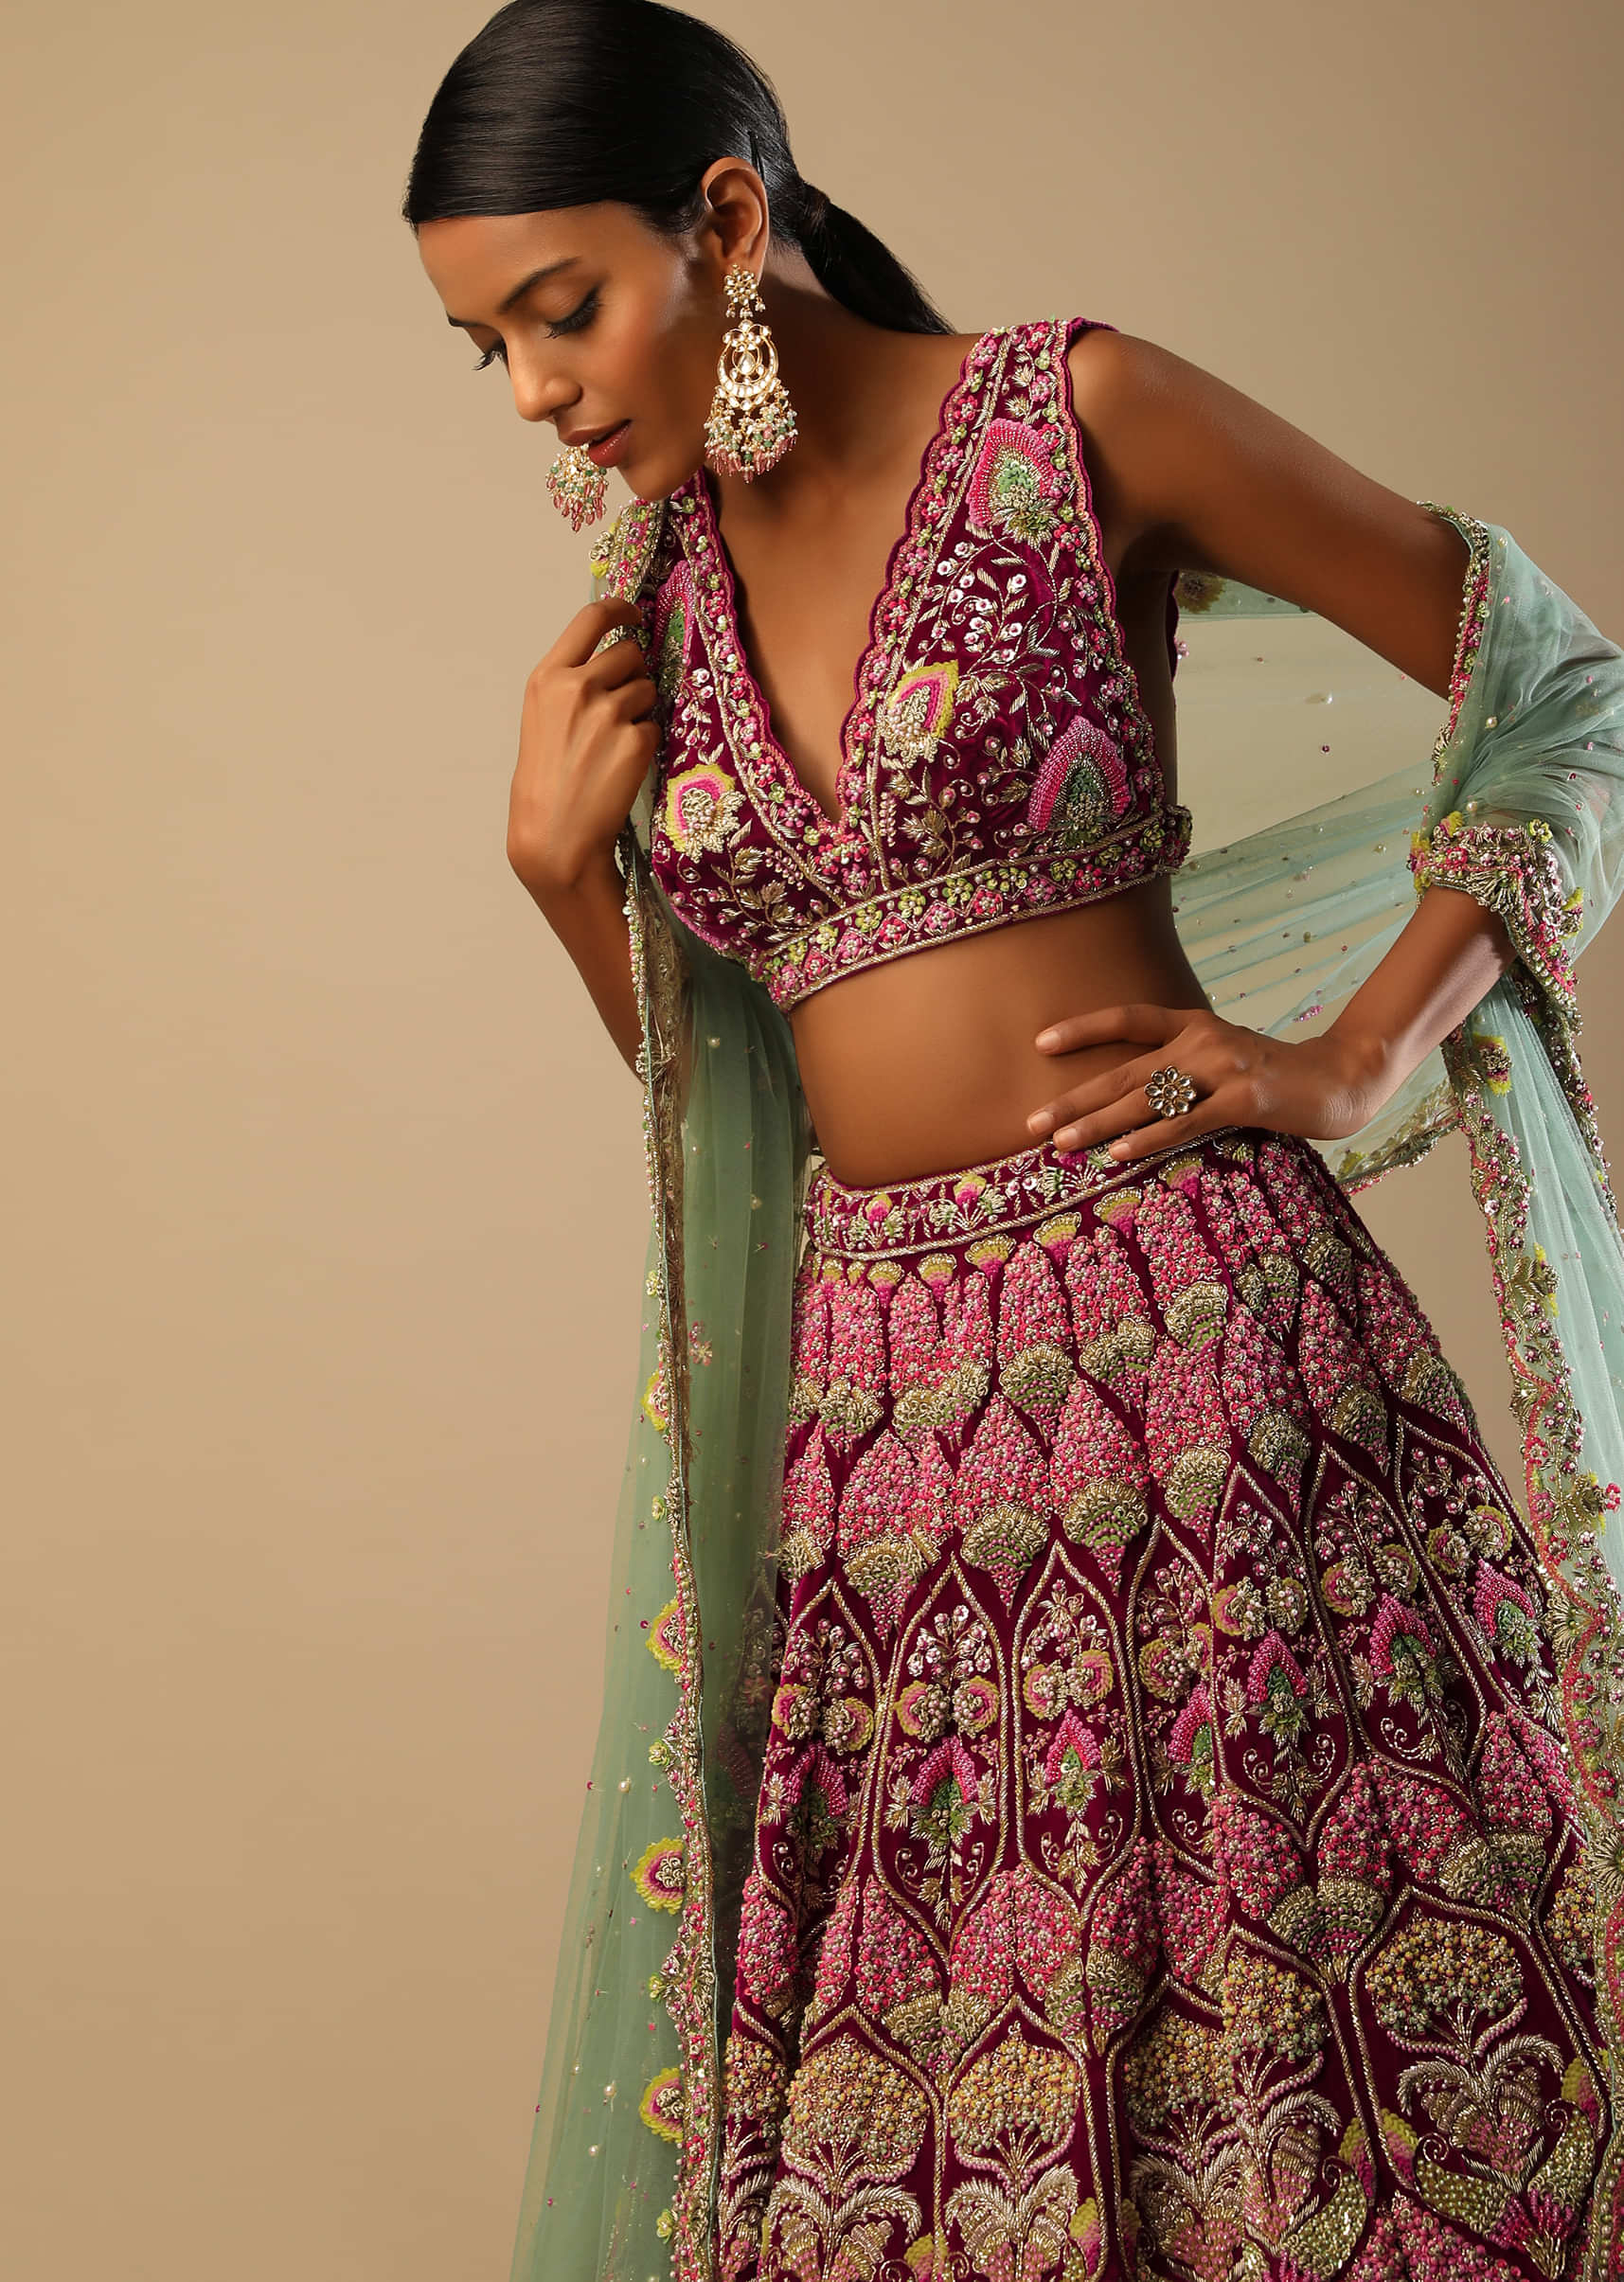 Sangria Lehenga Choli In Velvet With Multi Colored Hand Embroidery In Intricate Moroccan And Floral Motifs 